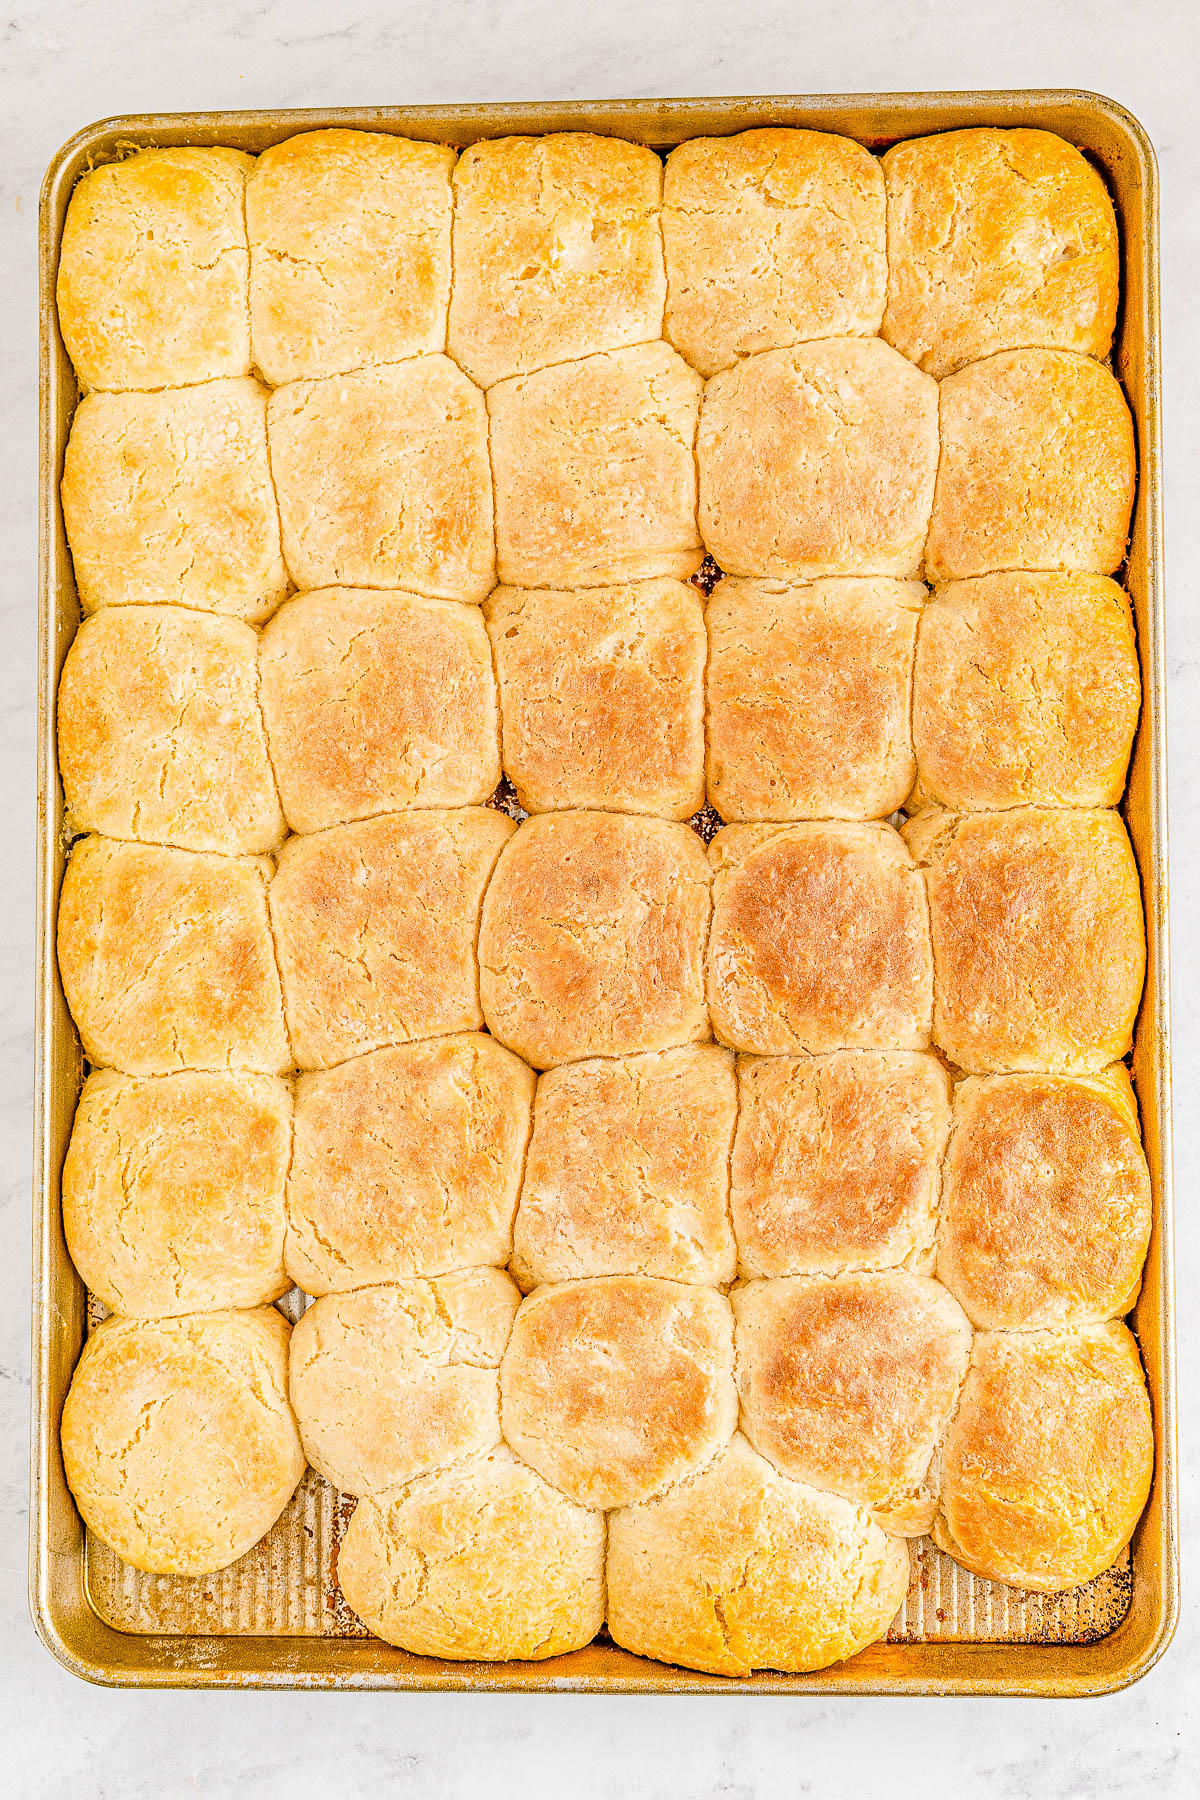 Angel Biscuits - The lightest, fluffiest, flakiest, melt-in-your-mouth biscuits you'll ever eat! Thanks to a trio of leavening agents, plenty of butter, and buttermilk, these EASY biscuits will become a family FAVORITE in no time! Serve them in place of regular biscuits or dinner rolls, or make them for a special brunch or holiday meal, and I promise no one will eat just one!